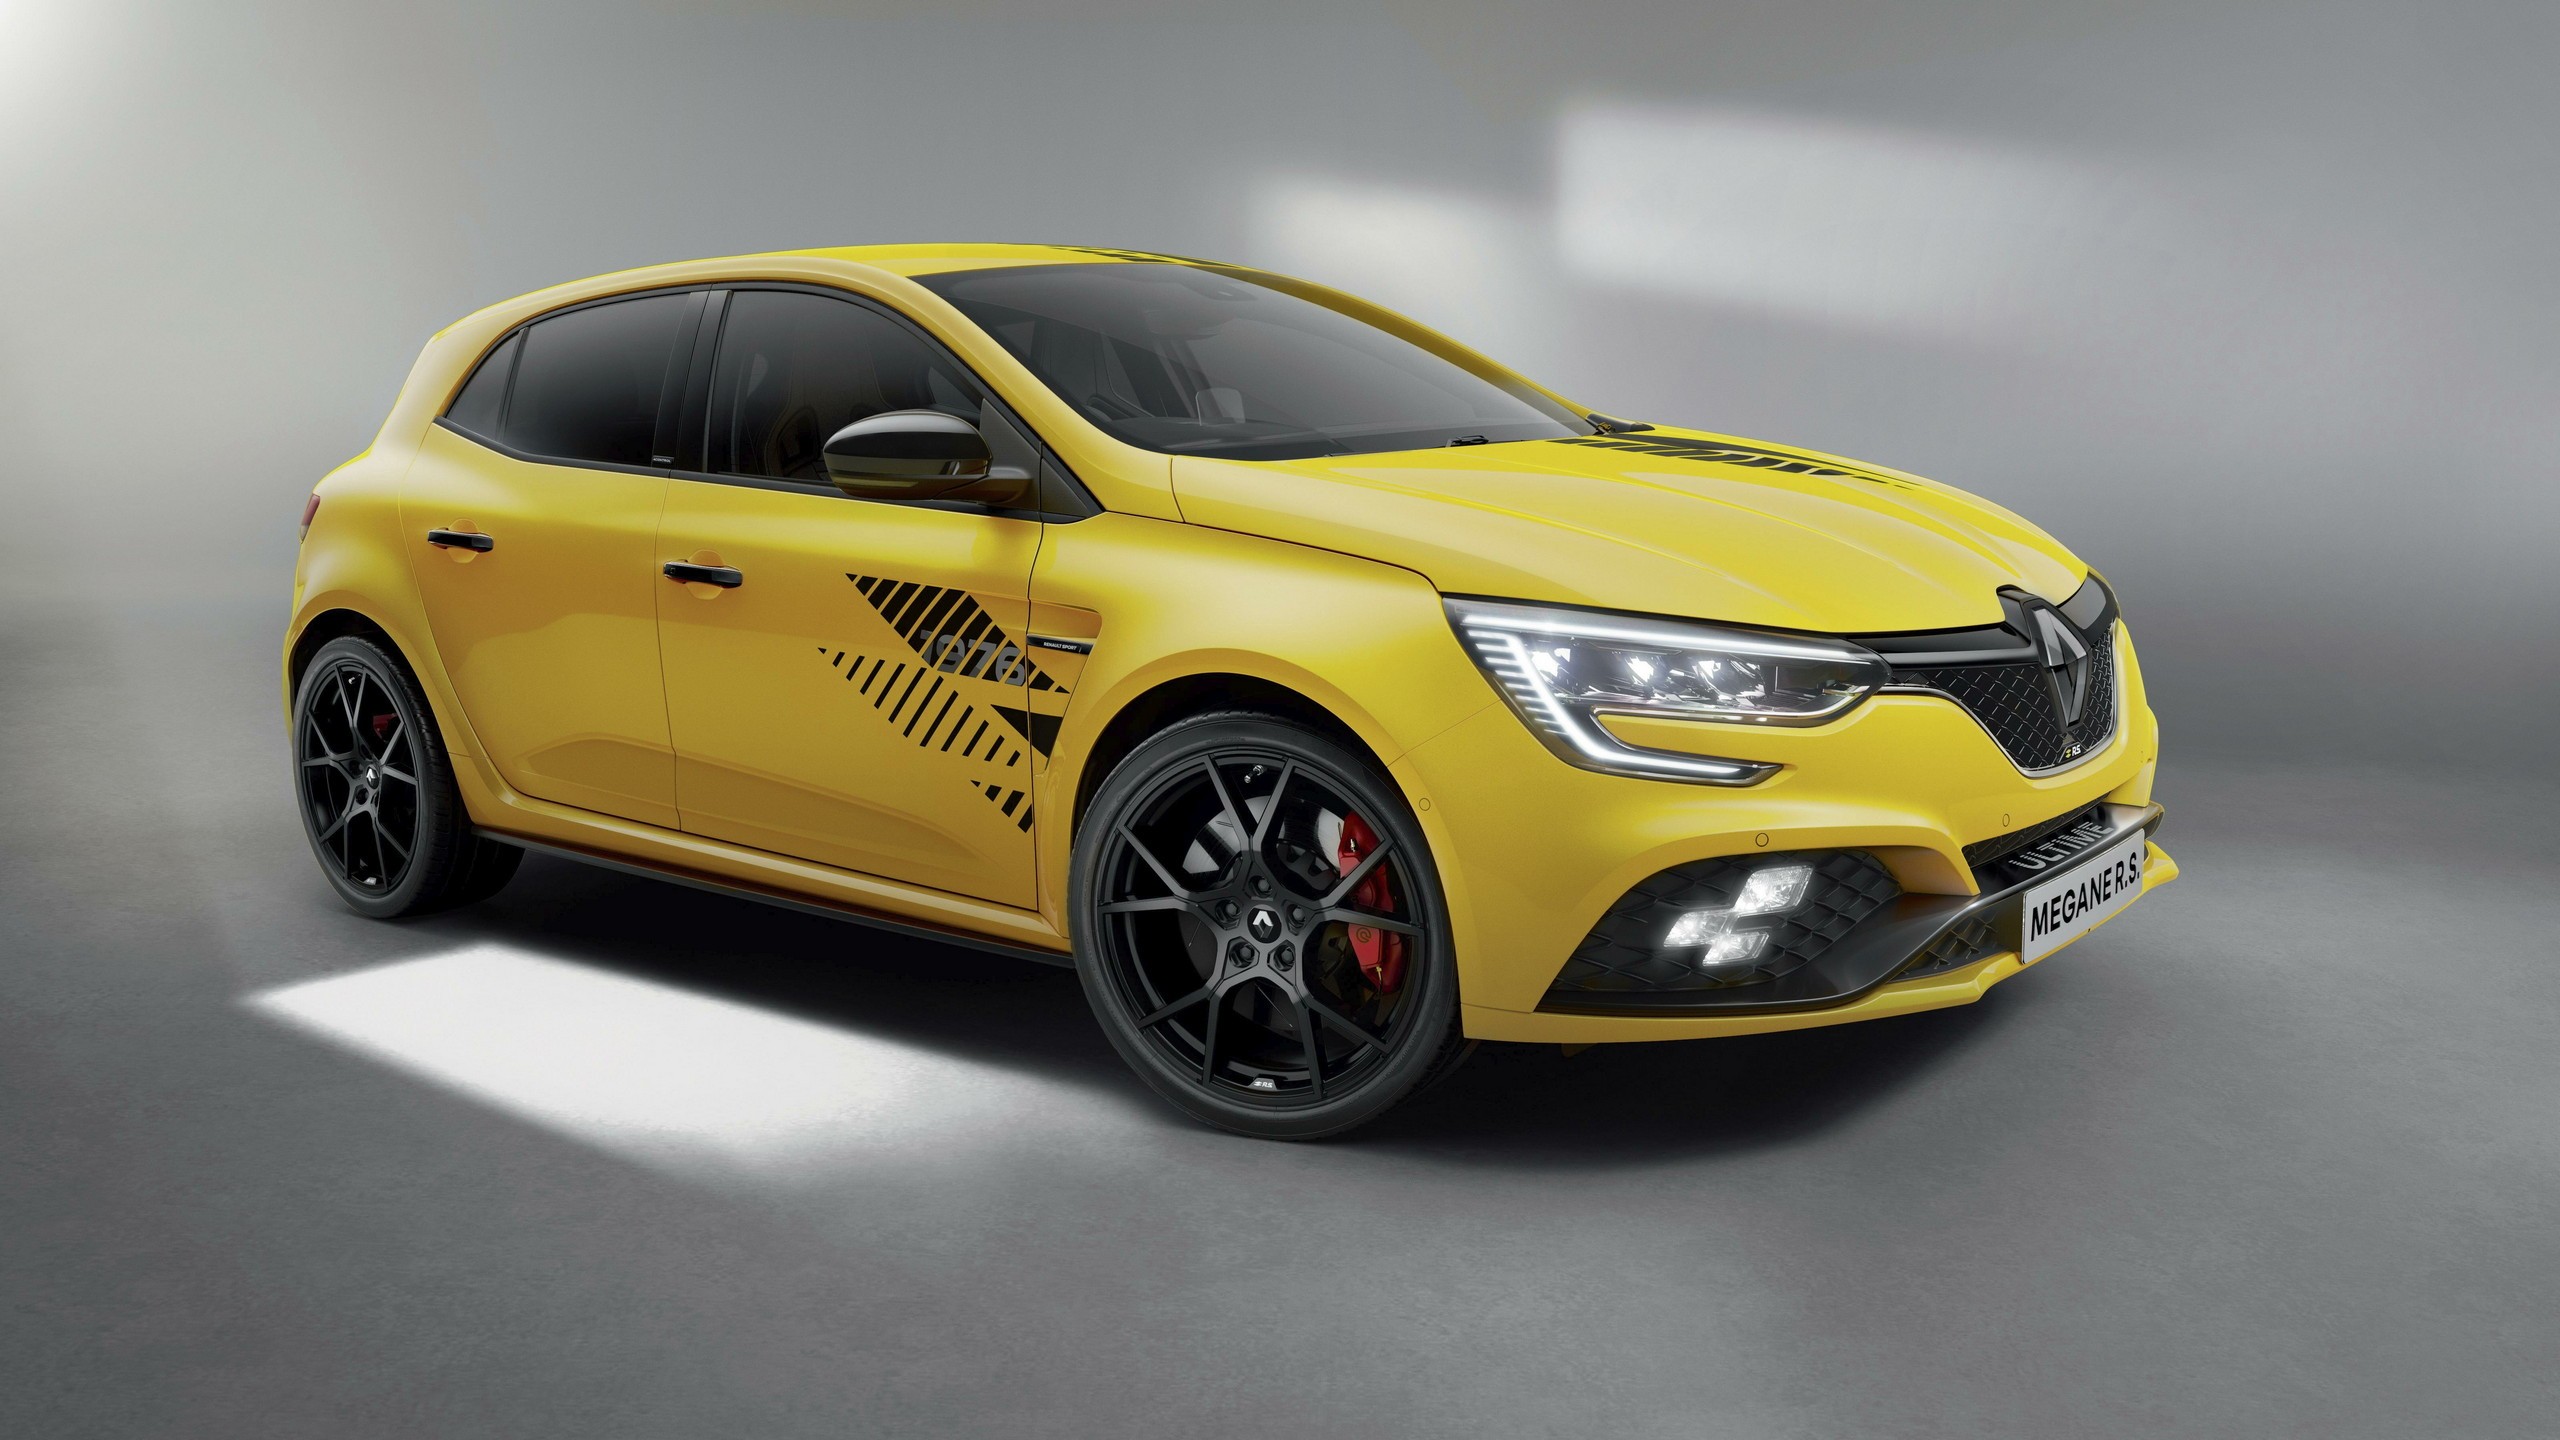 High-Performance Renault Sport Models Get A New Name